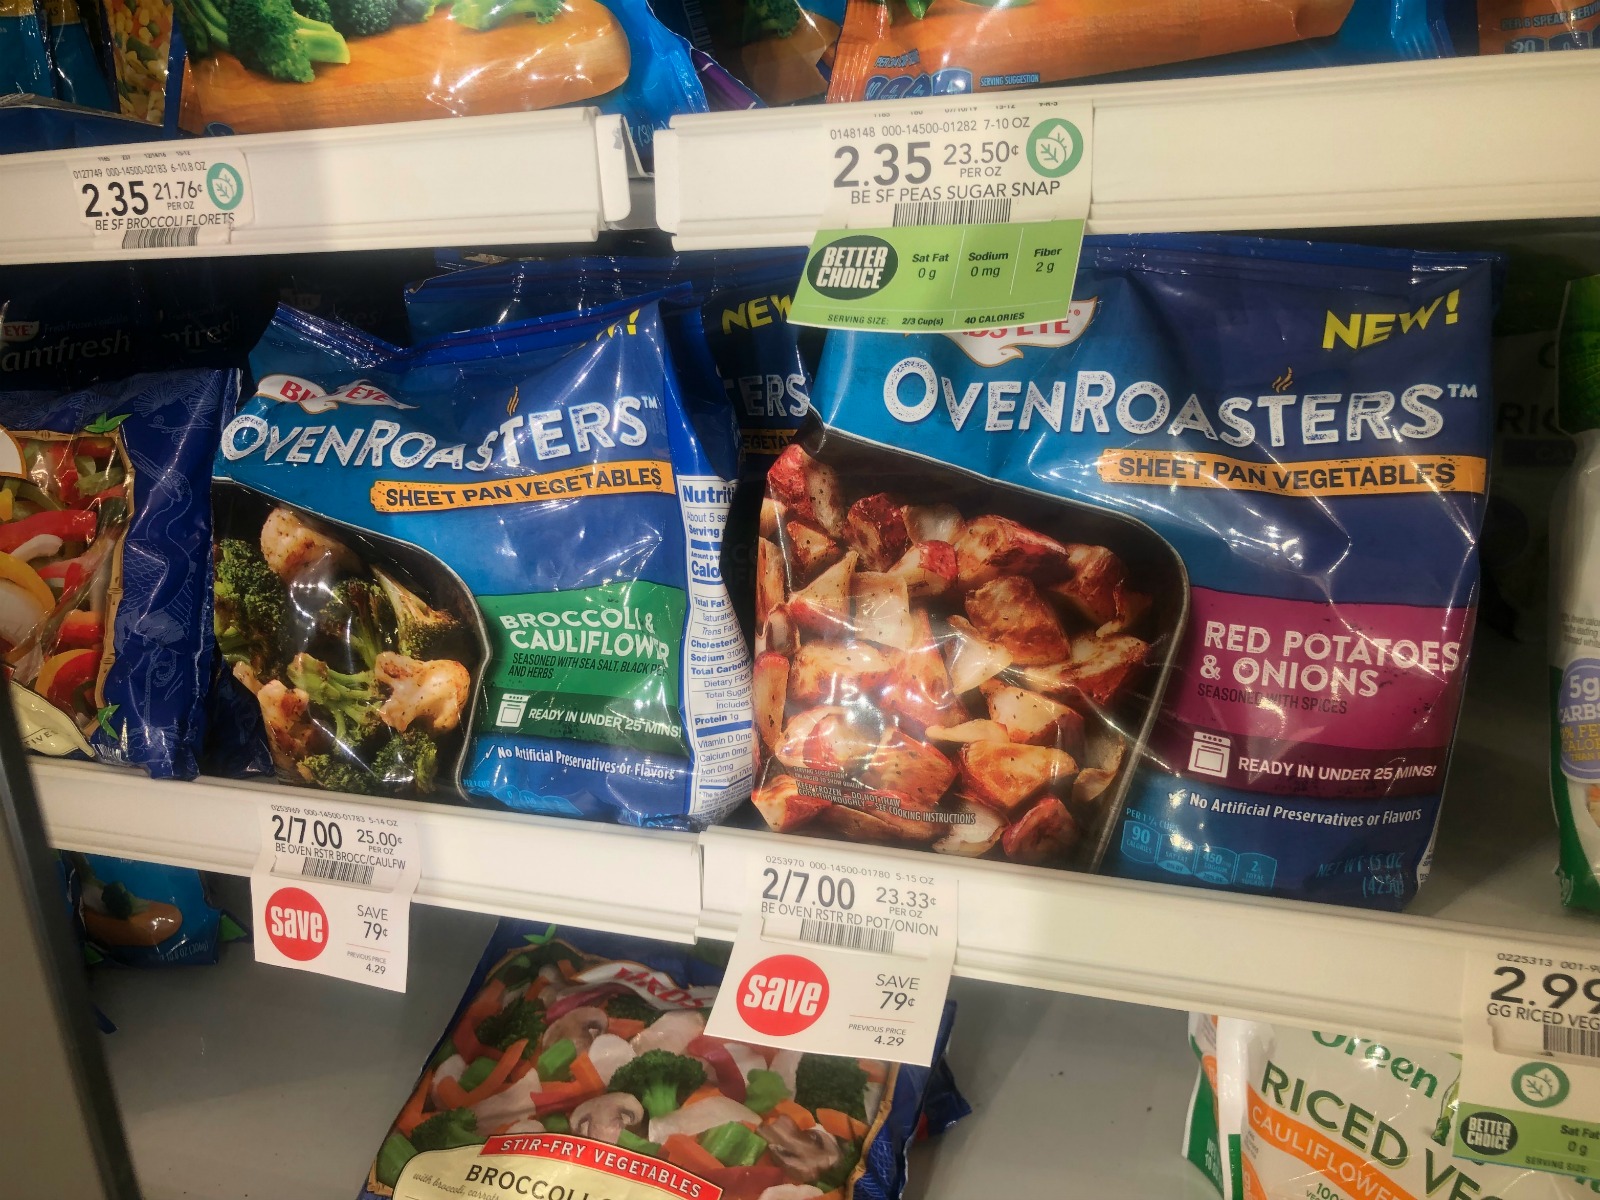 Try New Birds Eye Oven Roasters And Veggie Made Mac & Cheese & Save At Publix on I Heart Publix